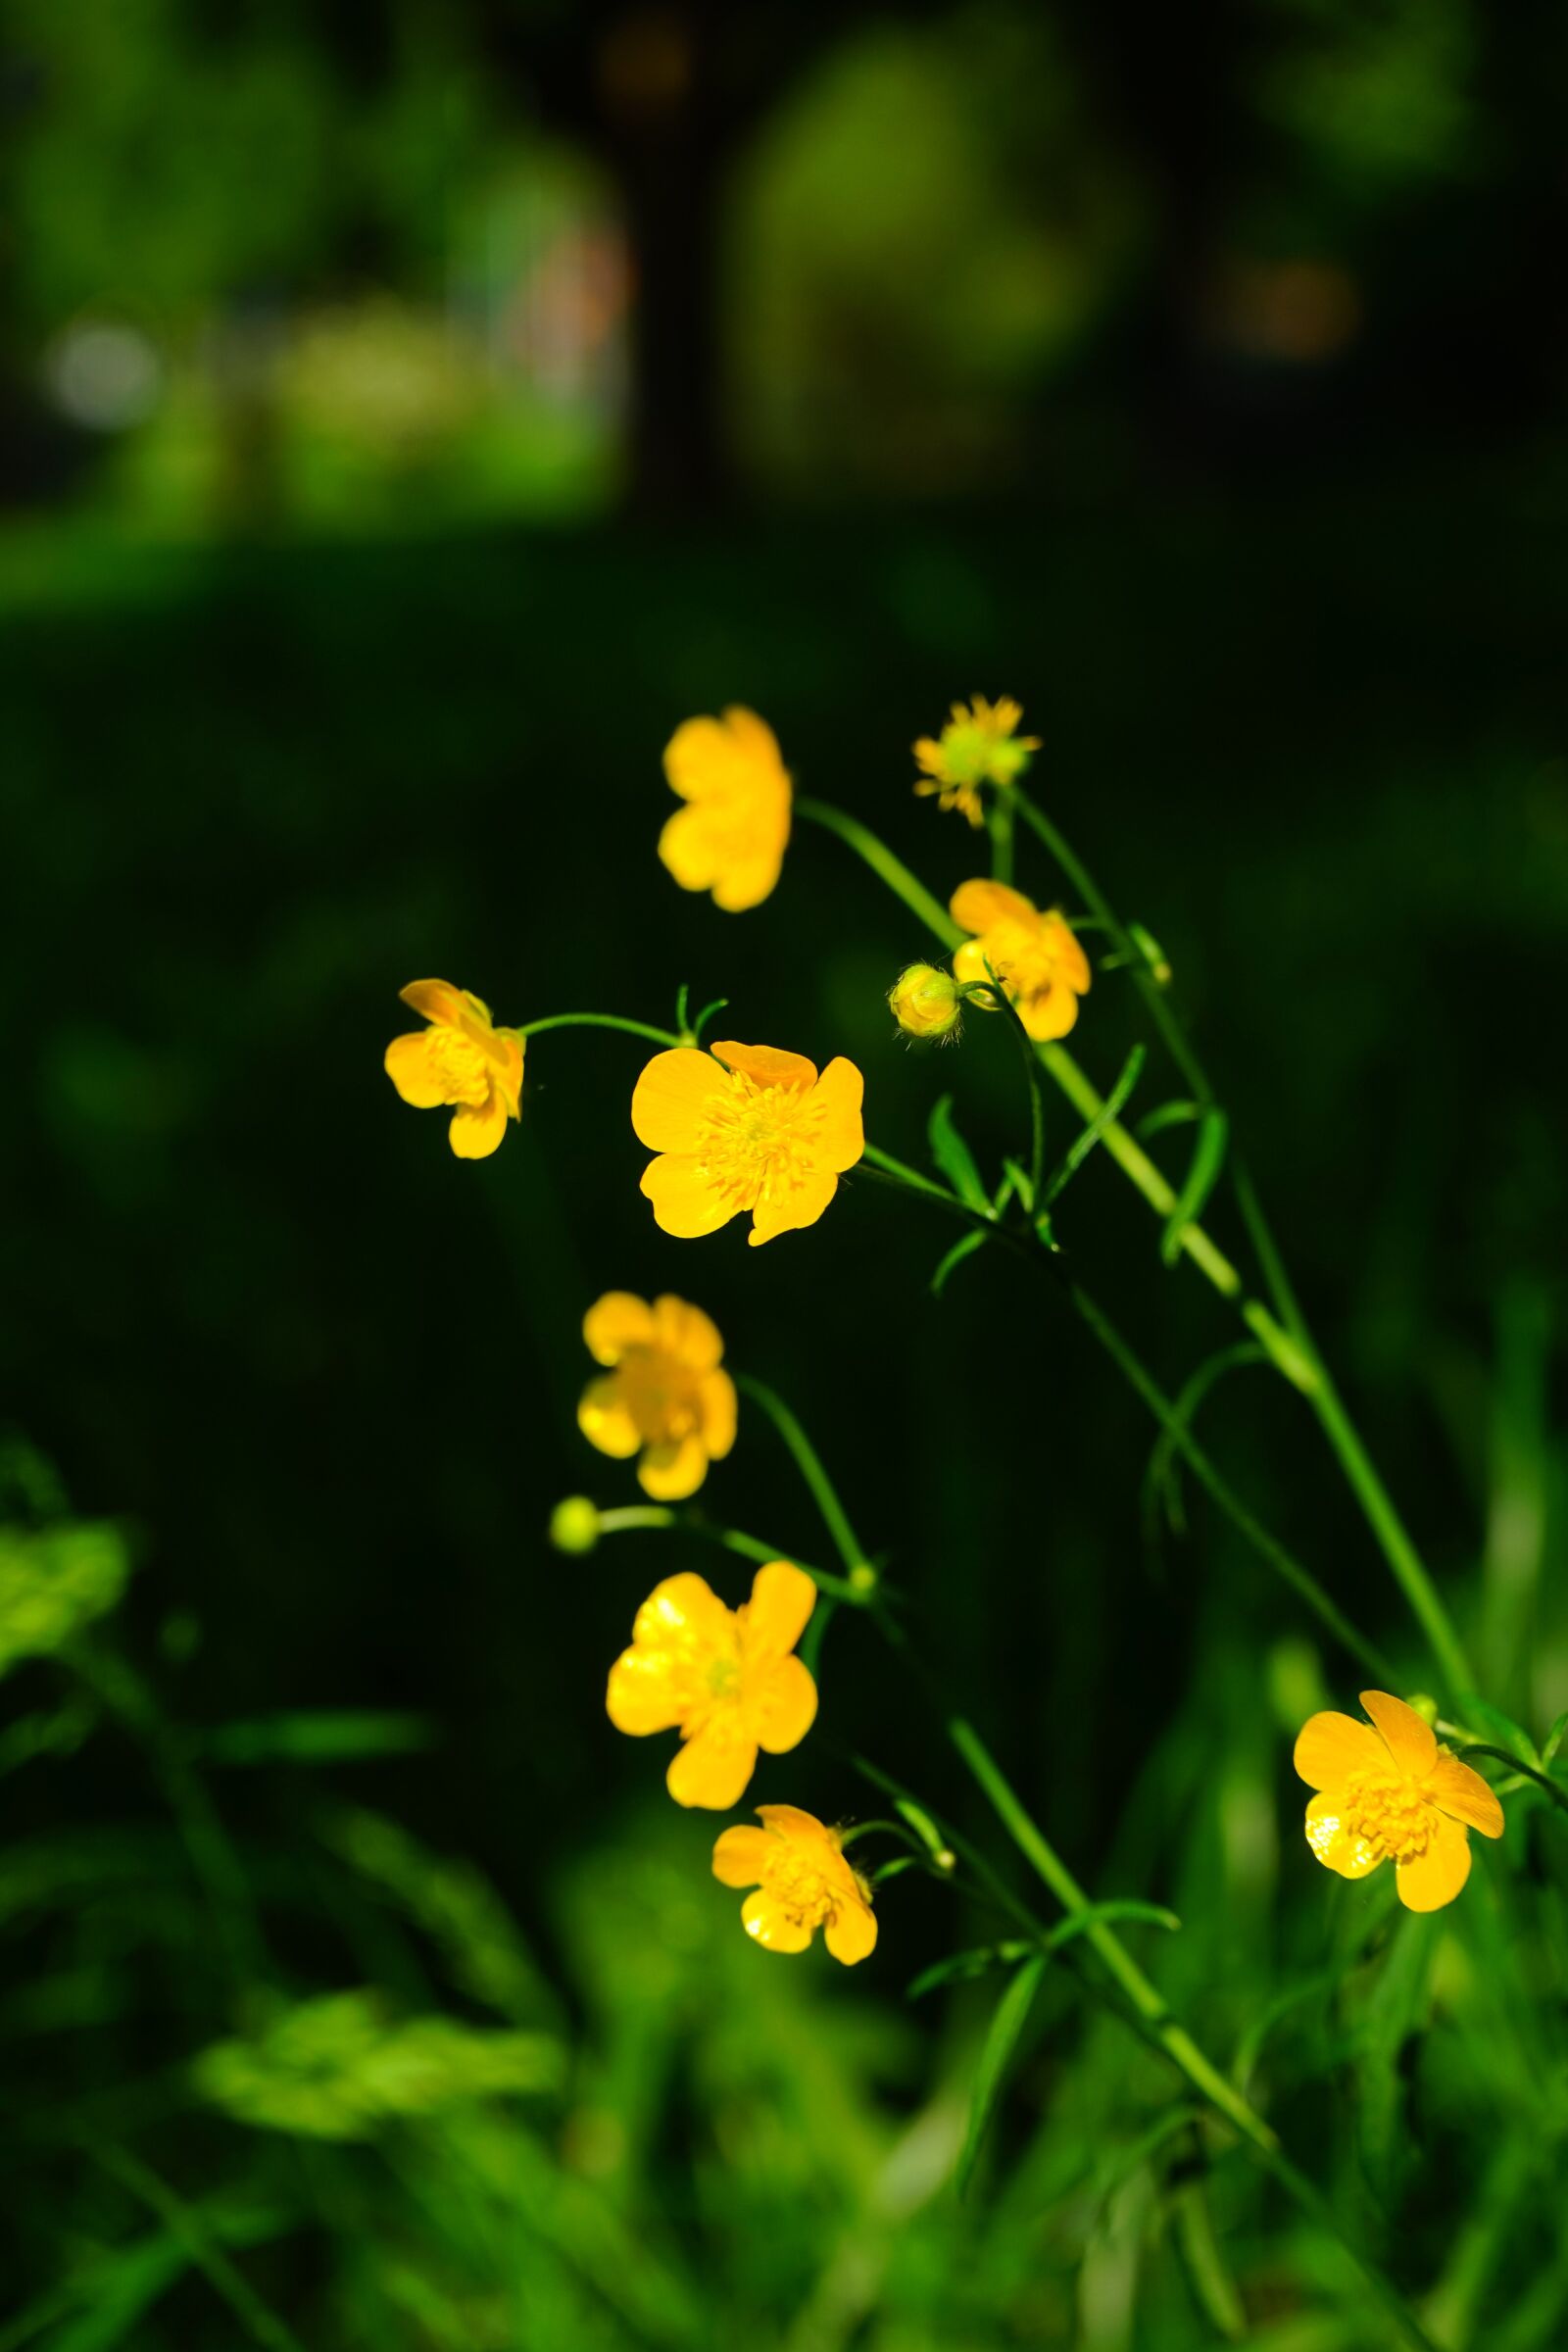 Sony a7 sample photo. Buttercup, pointed flower, flowers photography